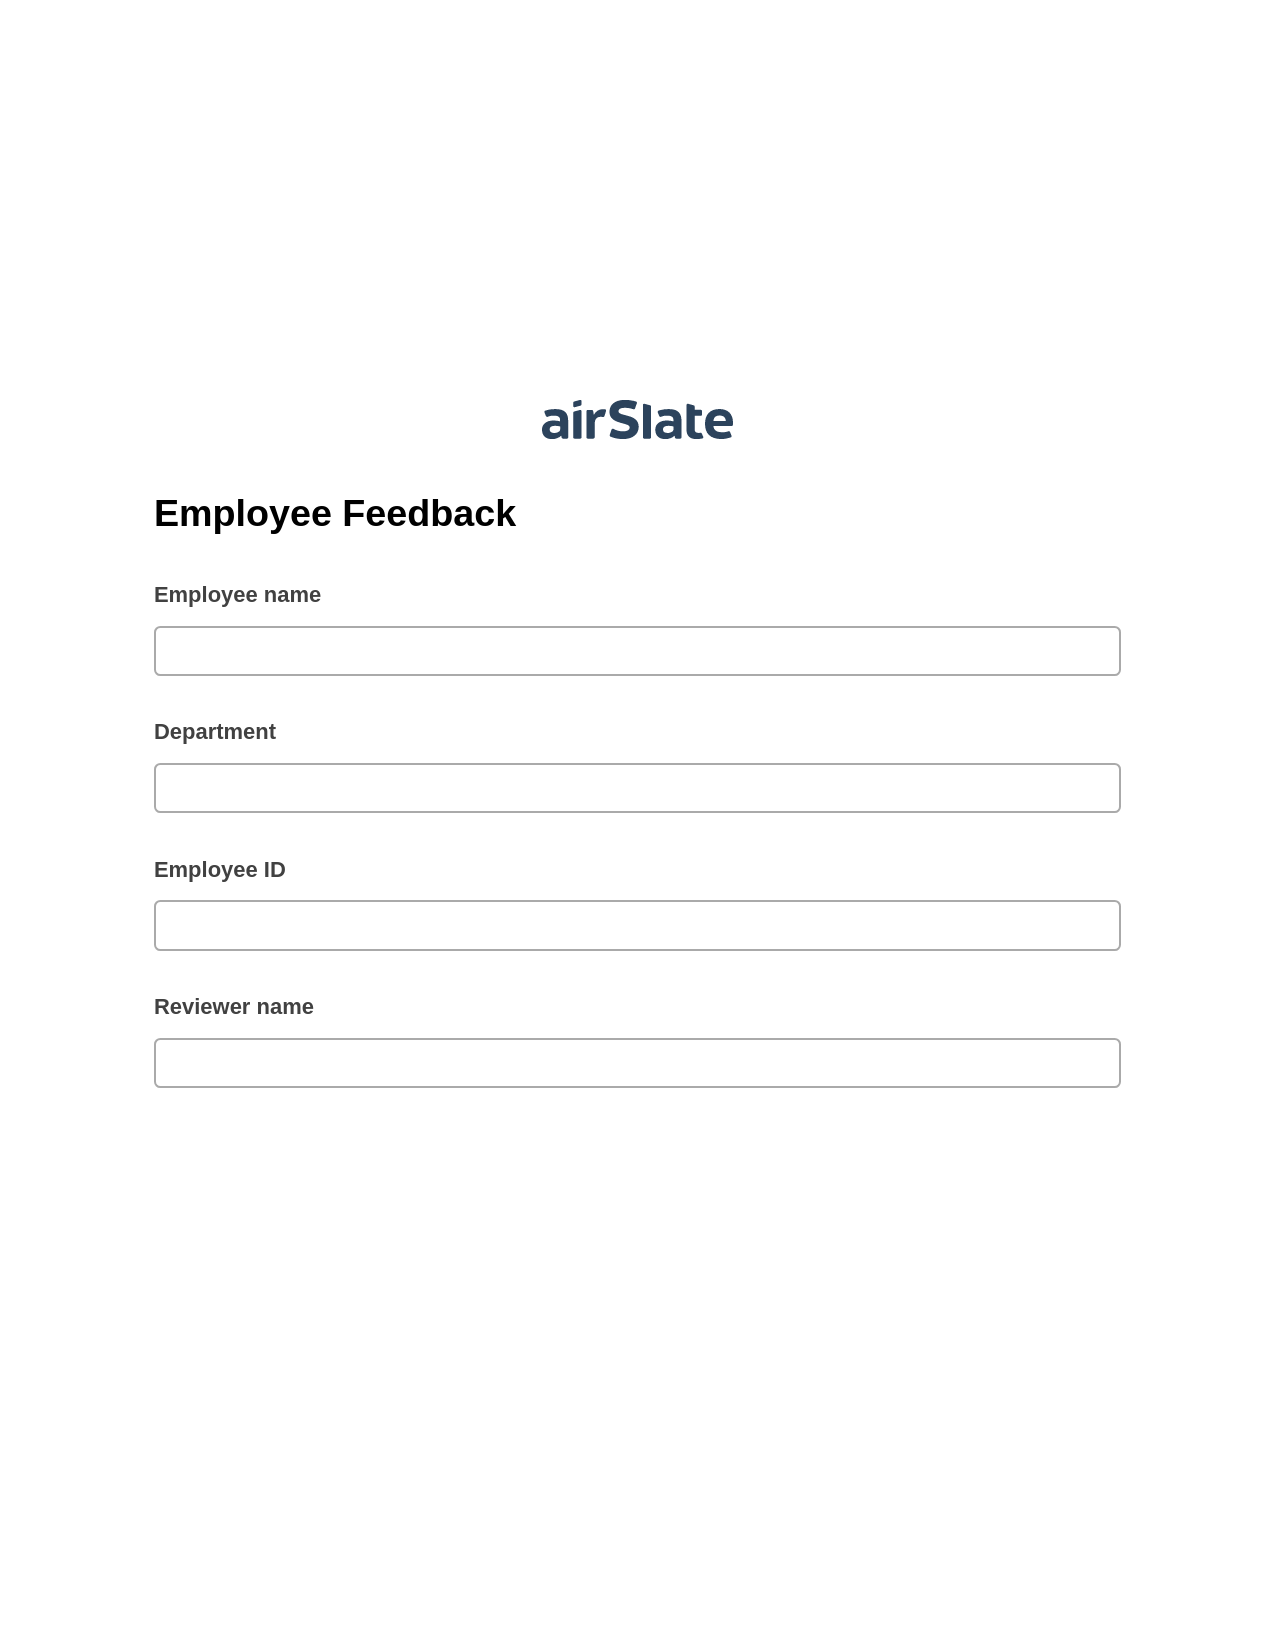 Employee Feedback Pre-fill from Google Sheet Dropdown Options Bot, Send a Slate with Roles Bot, Export to Smartsheet